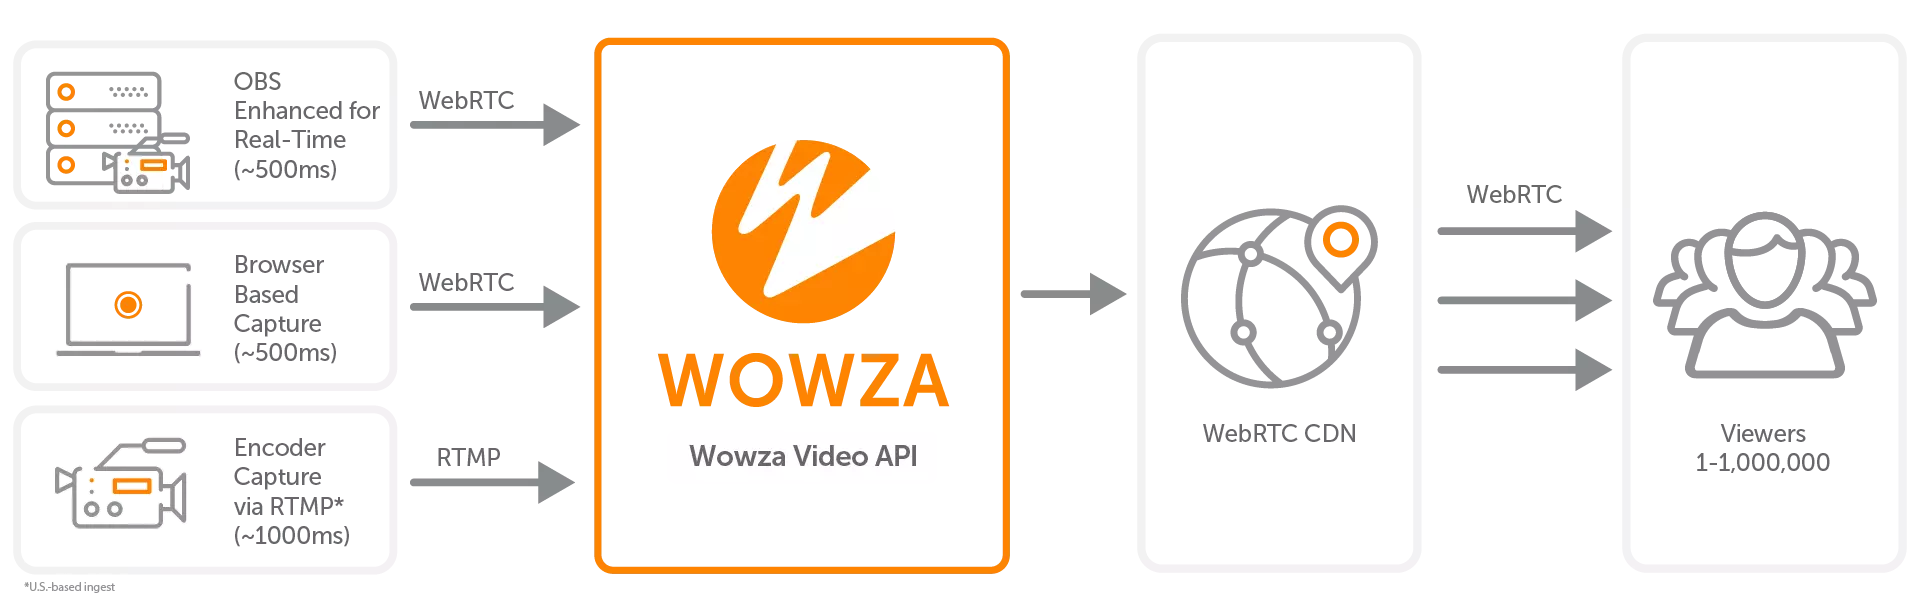 A workflow showing how Wowza's technology supports sub-second streaming to a million viewers from encoding through playback.